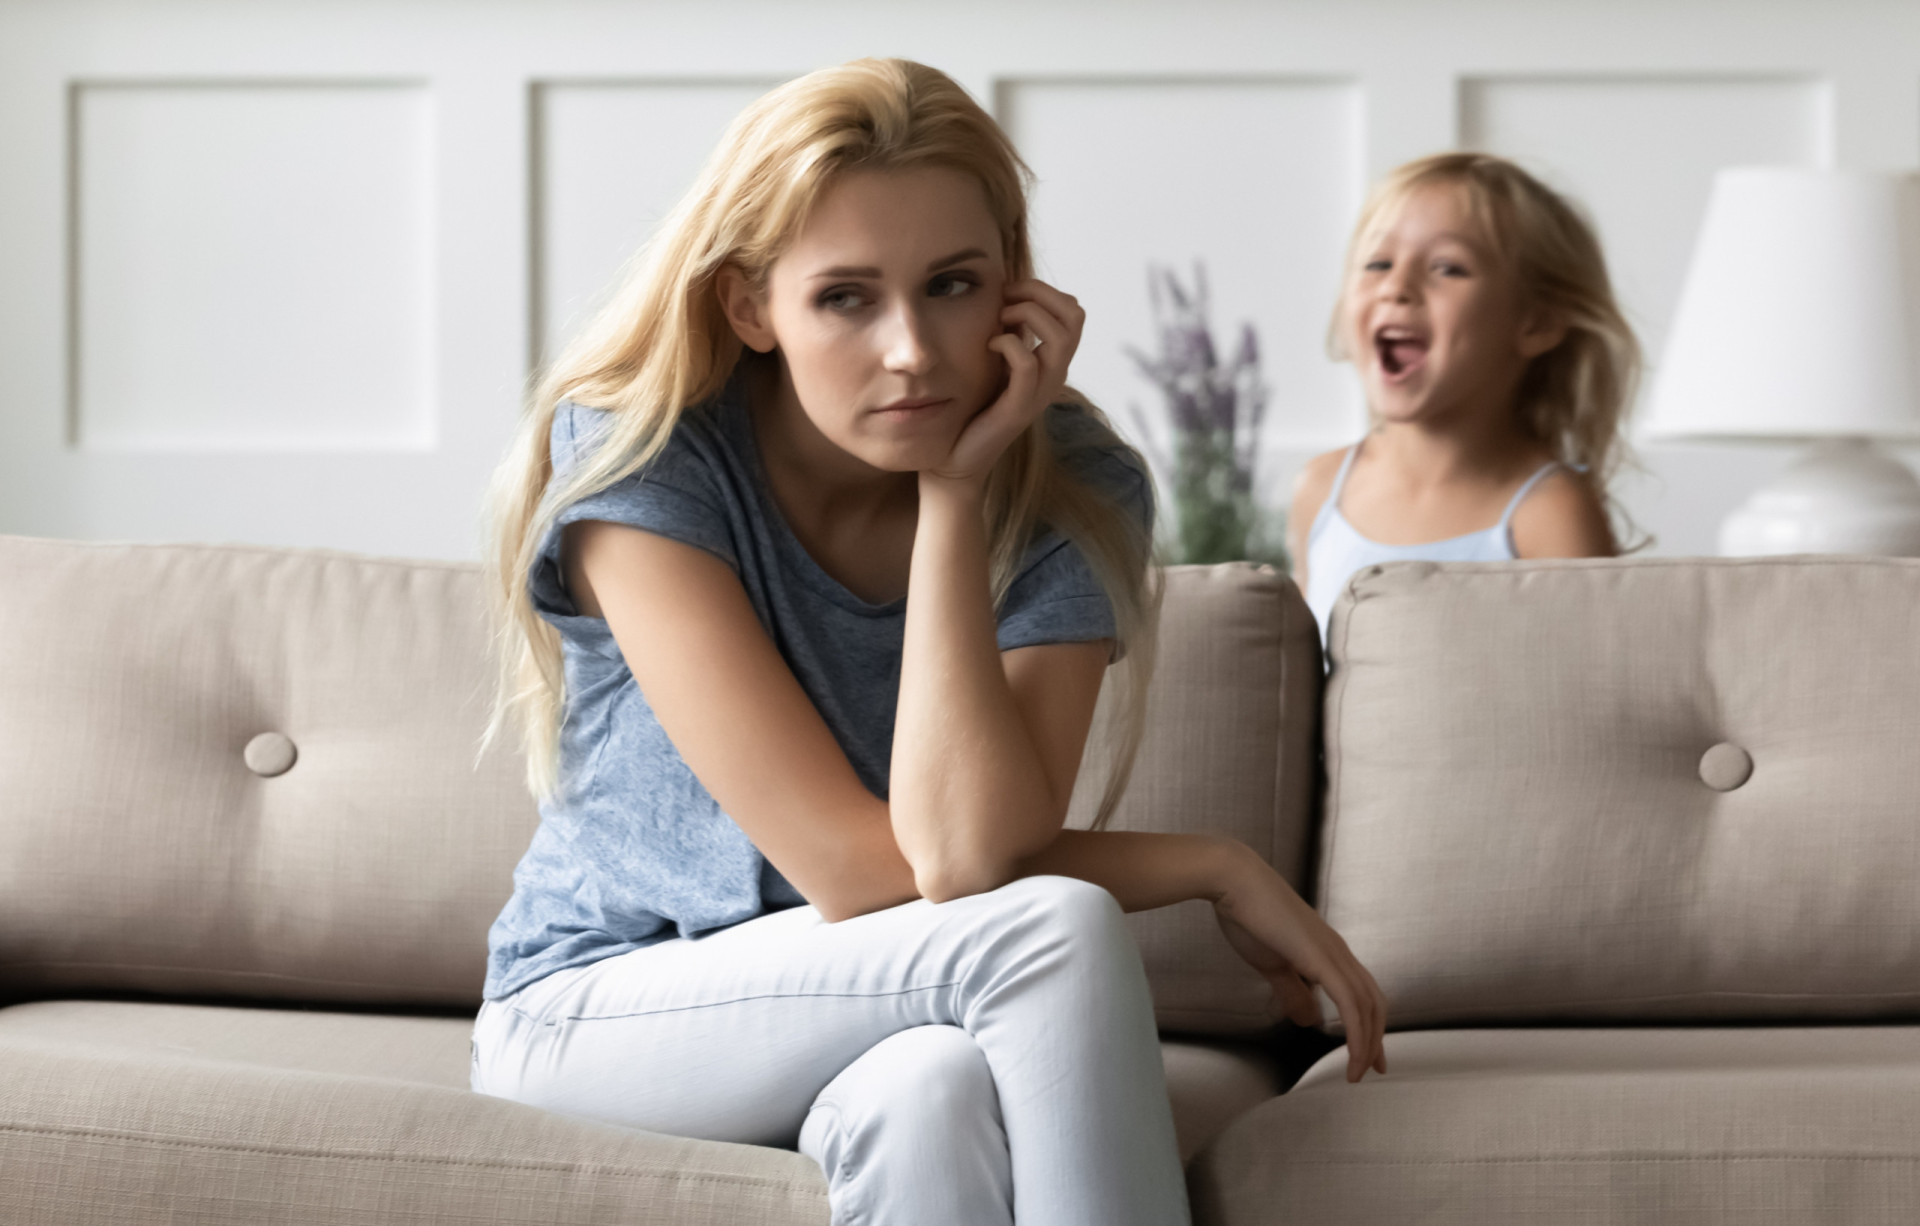 <p>Spending time with your kids is important. But when you have more than one child it can be difficult not to compare experiences and personalities of your other children, and guilt can start to creep in. To avoid accusations of favoritism, make sure each child gets some one-on-one quality time with you.</p><p>You may also like:<a href="https://www.starsinsider.com/n/410856?utm_source=msn.com&utm_medium=display&utm_campaign=referral_description&utm_content=548172en-en"> Sexiest Men Alive: Then and now</a></p>